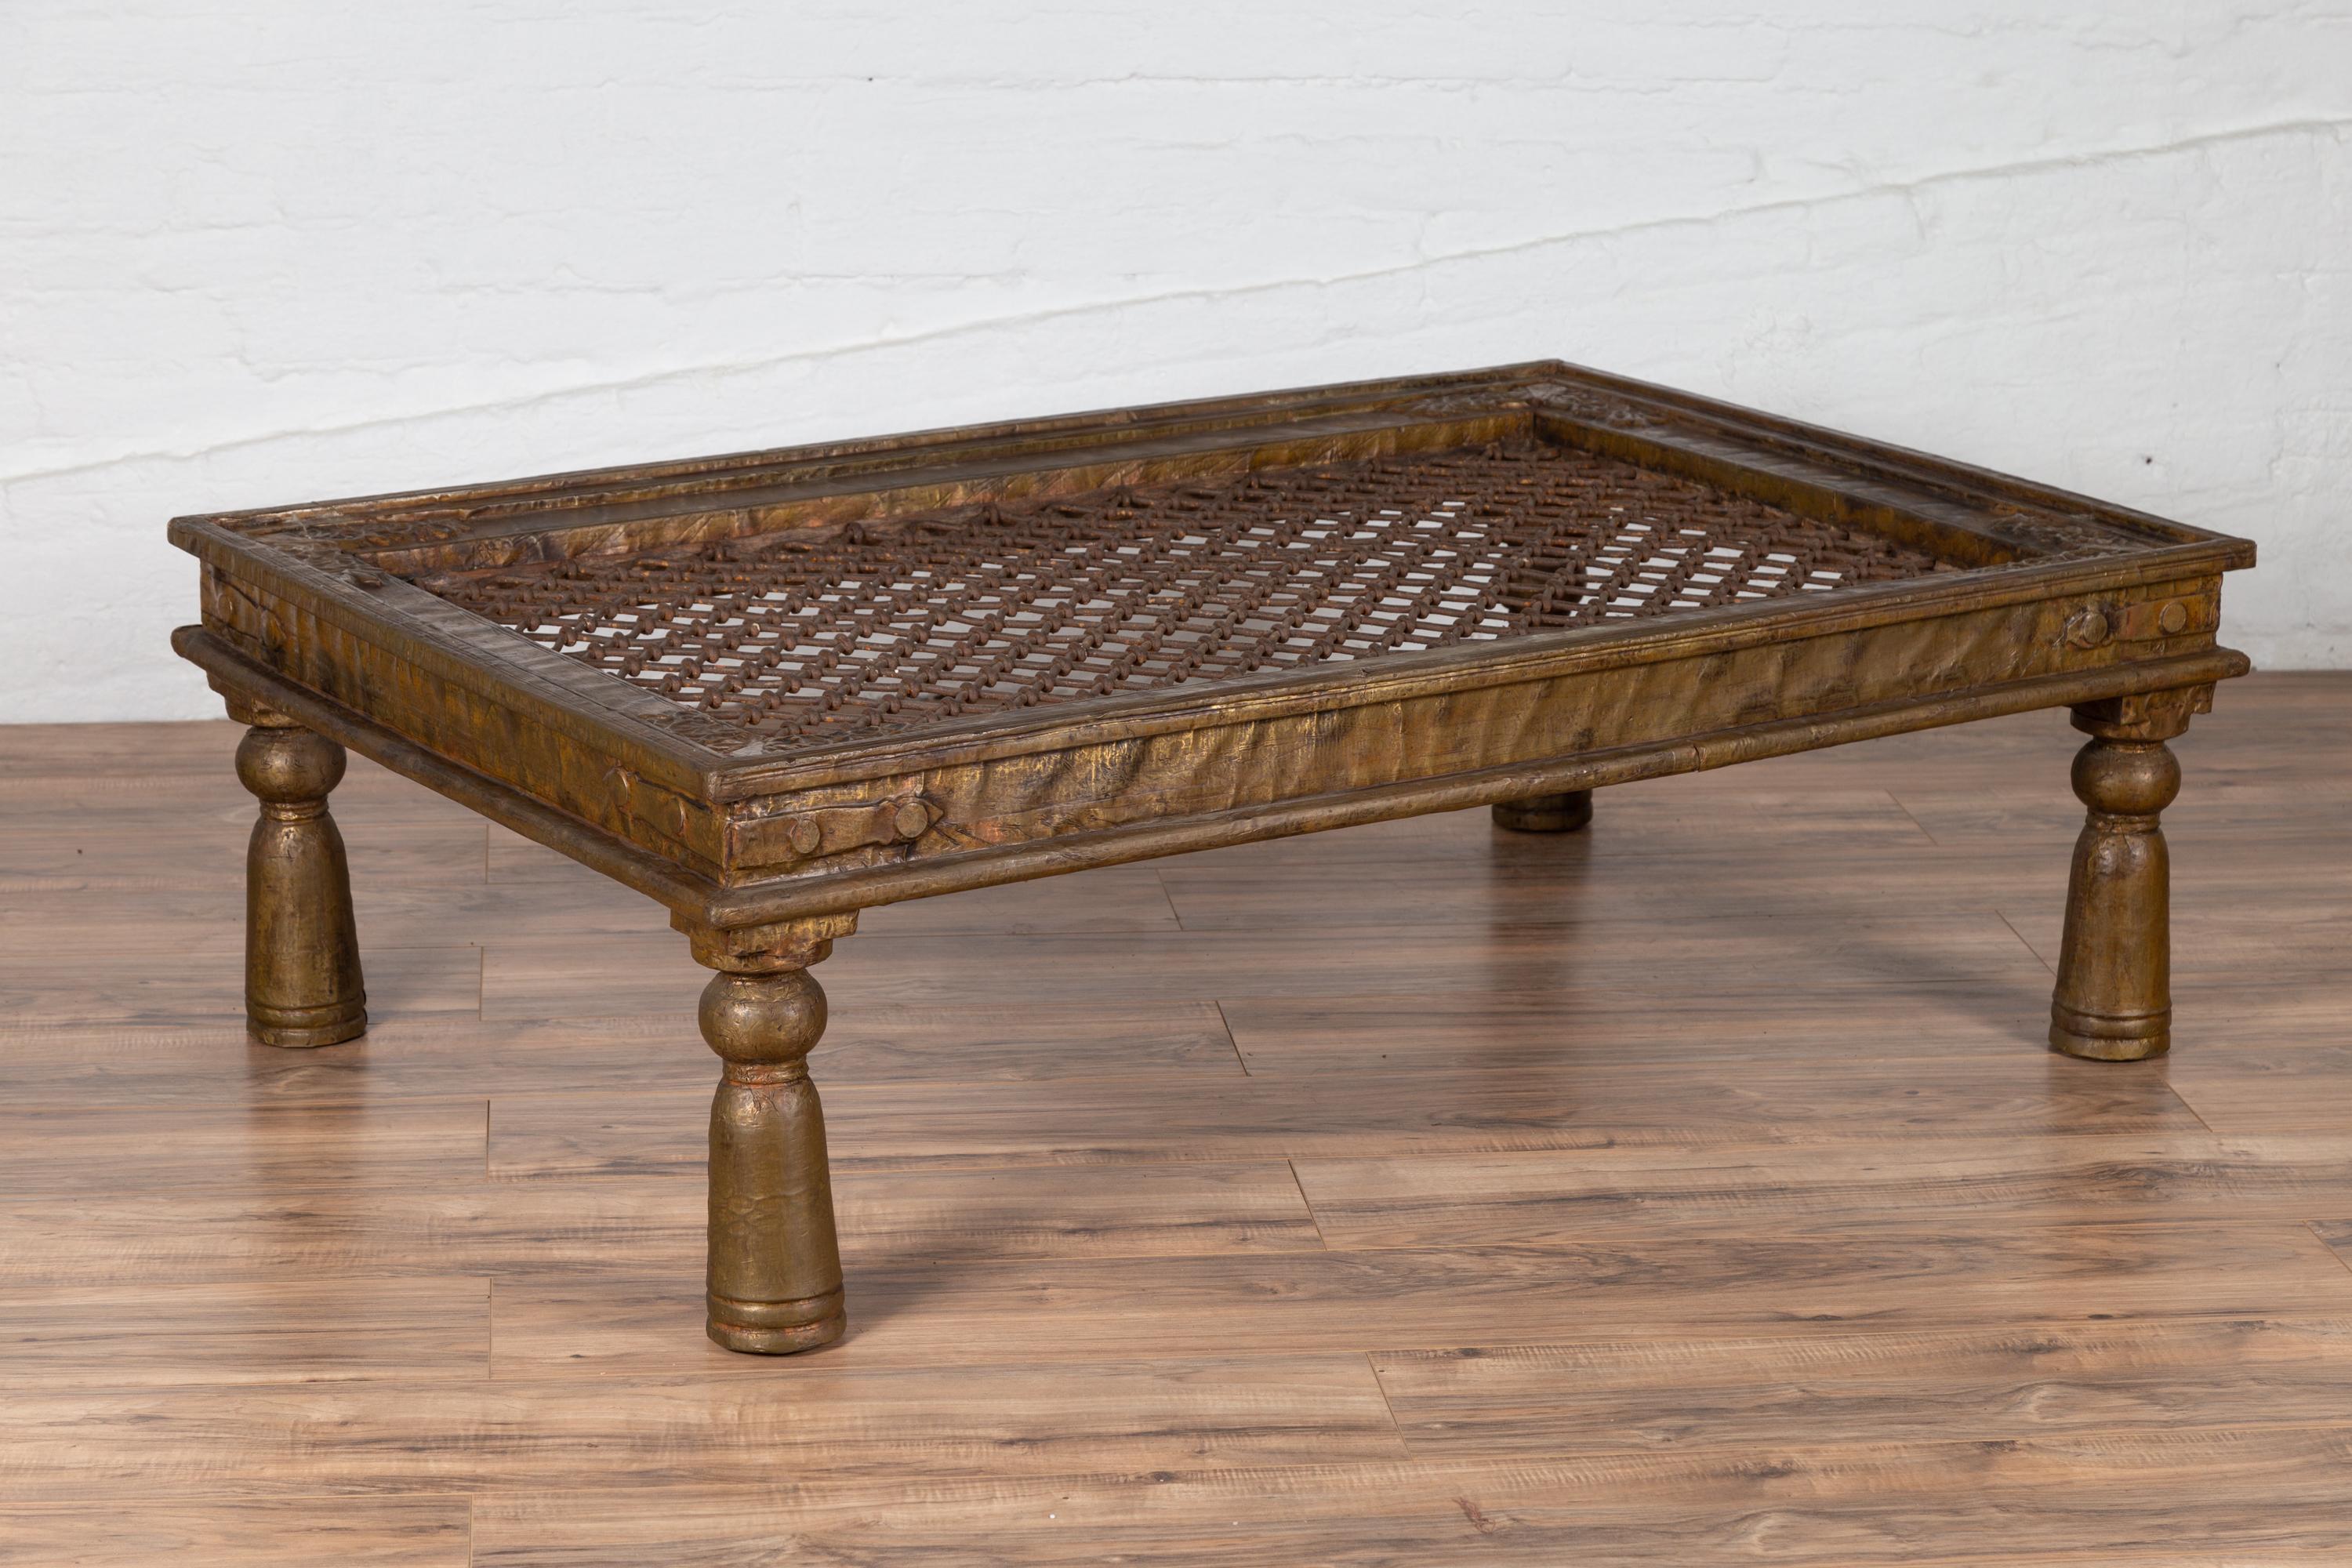 Antique Indian Window Grate Made into a Coffee Table with Copper Sheathing 6